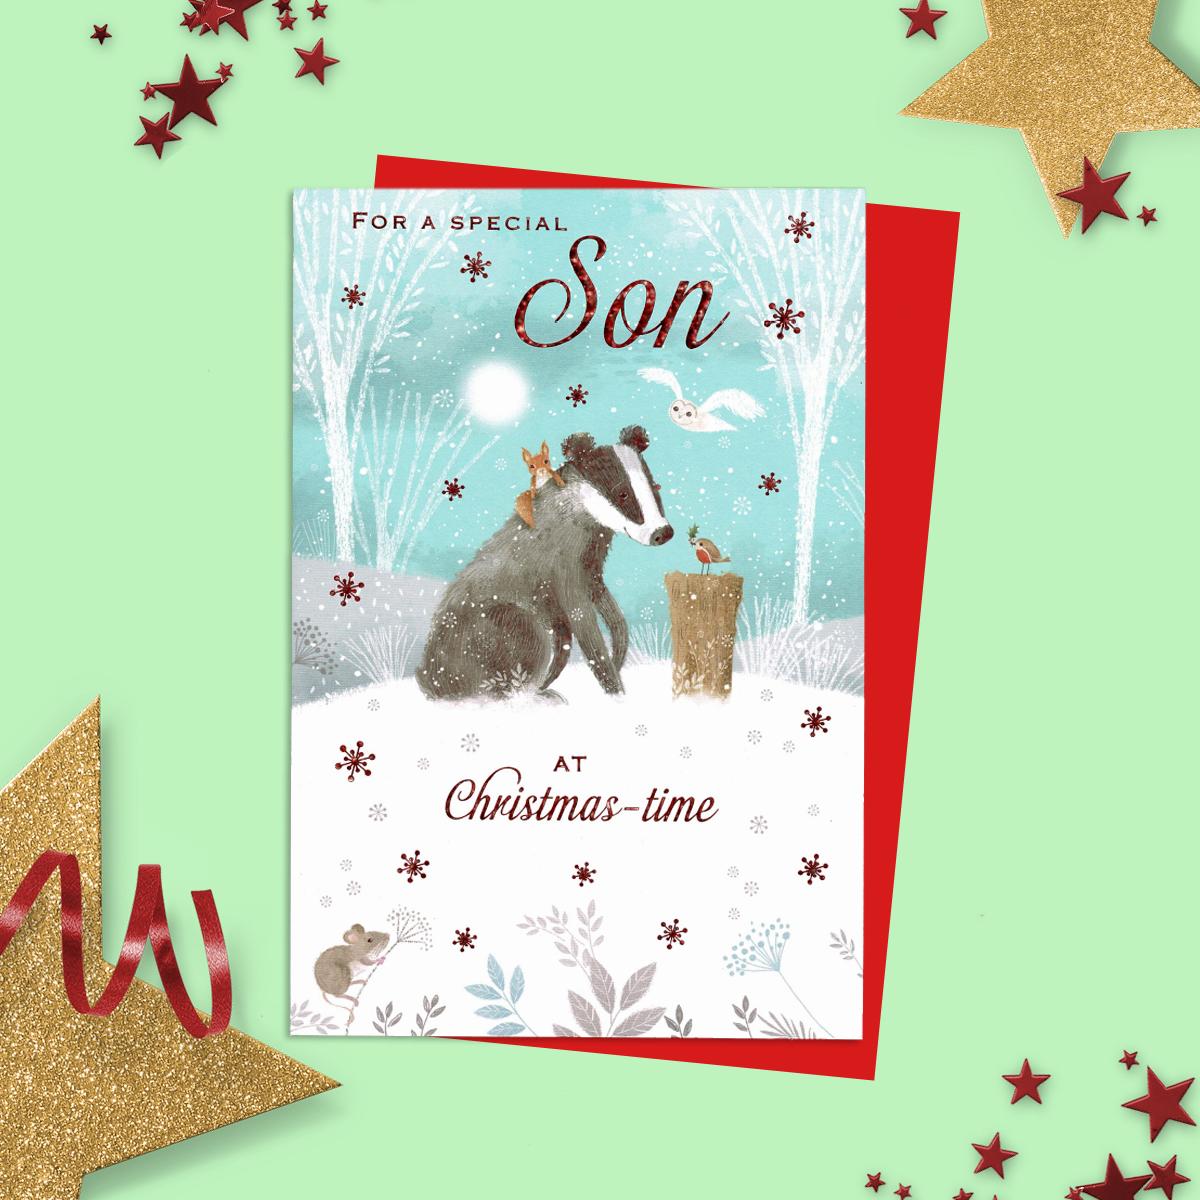 For A Special Son At Christmas-Time Featuring A Badger And Woodland Friends! Finished With Red Foil Detail And Red Envelope